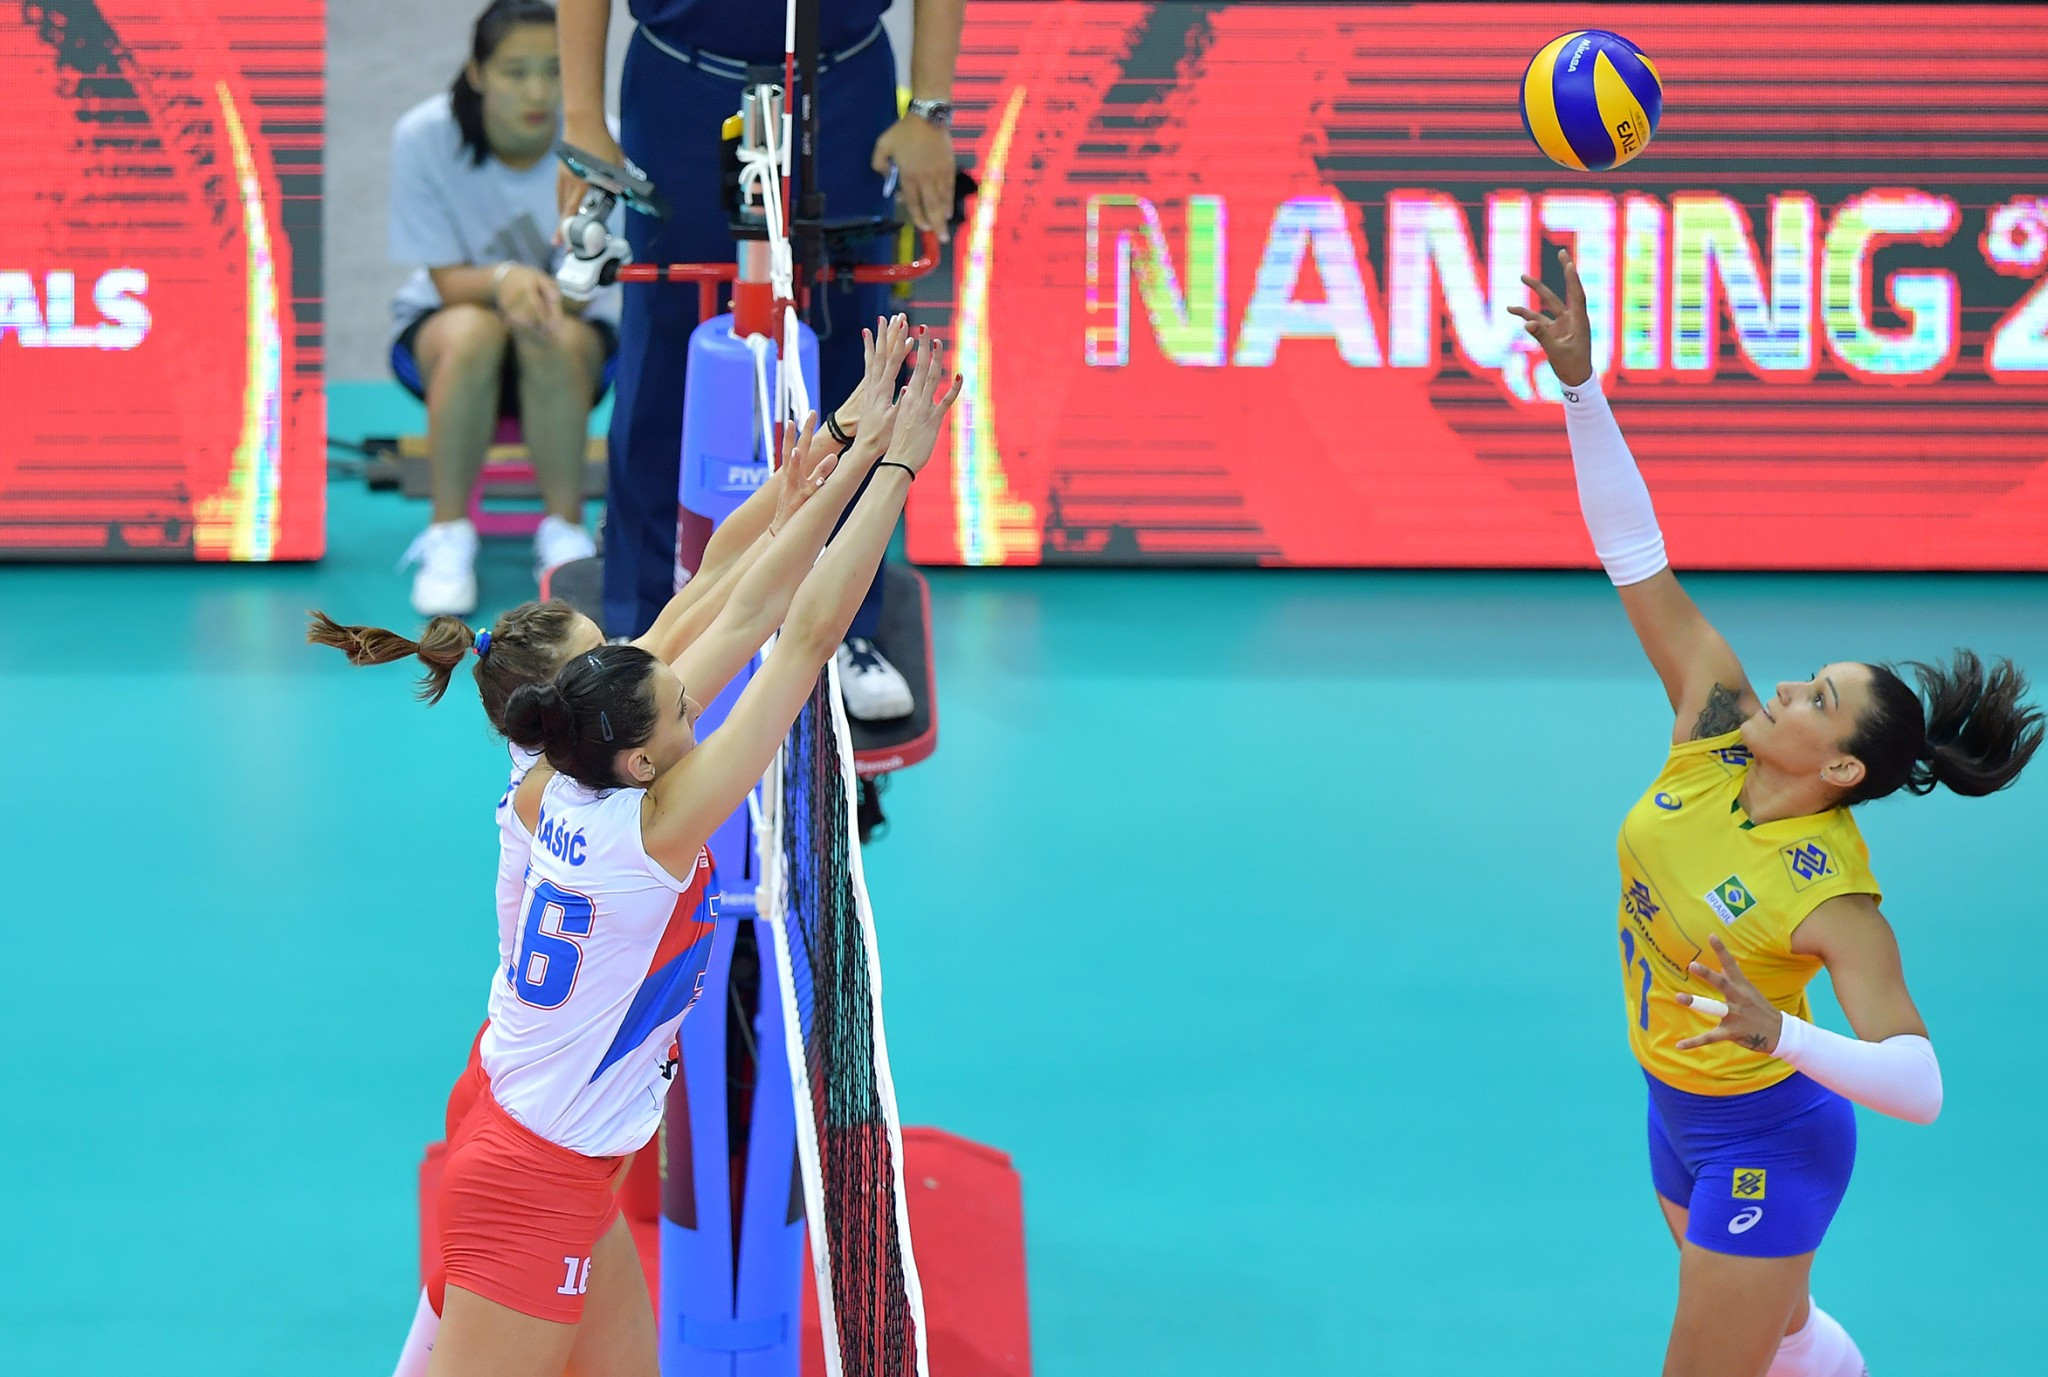 Brazil will get the chance to defend their title as they beat Serbia in the other semi-final ©FIVB